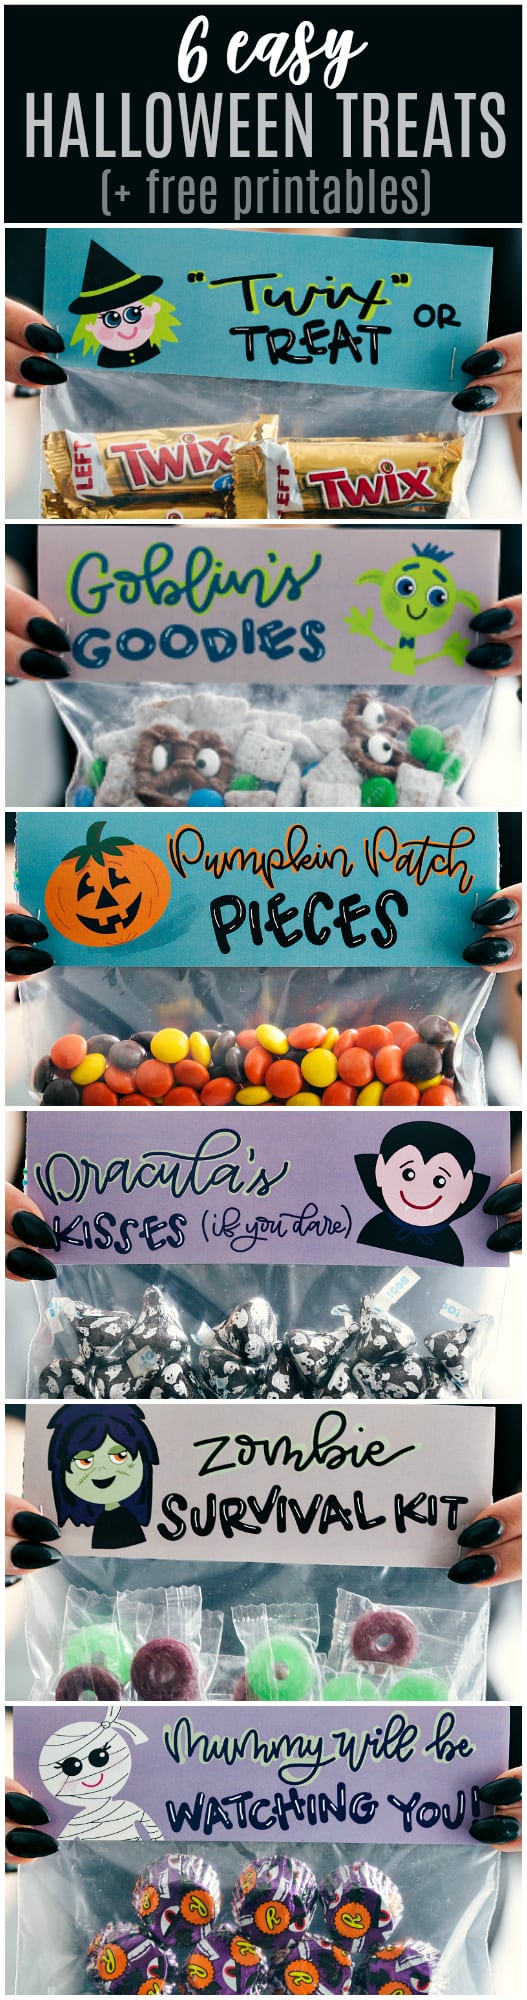 6 fun and festive easy Halloween bags filled with delicious treats! These candies/treats are put in a snack-size ziplock bag and you can staple on the FREE printable bag toppers! via chelseasmessyapron.com #halloween #gift #favor #party #dessert #candy #treat #easy #quick #free #printable #witch #pumpkin #dracula #zombie #mummy #ghost #skeleton #monster #zombies #kids #healthy #healthier #simple #fun #halloween #decor